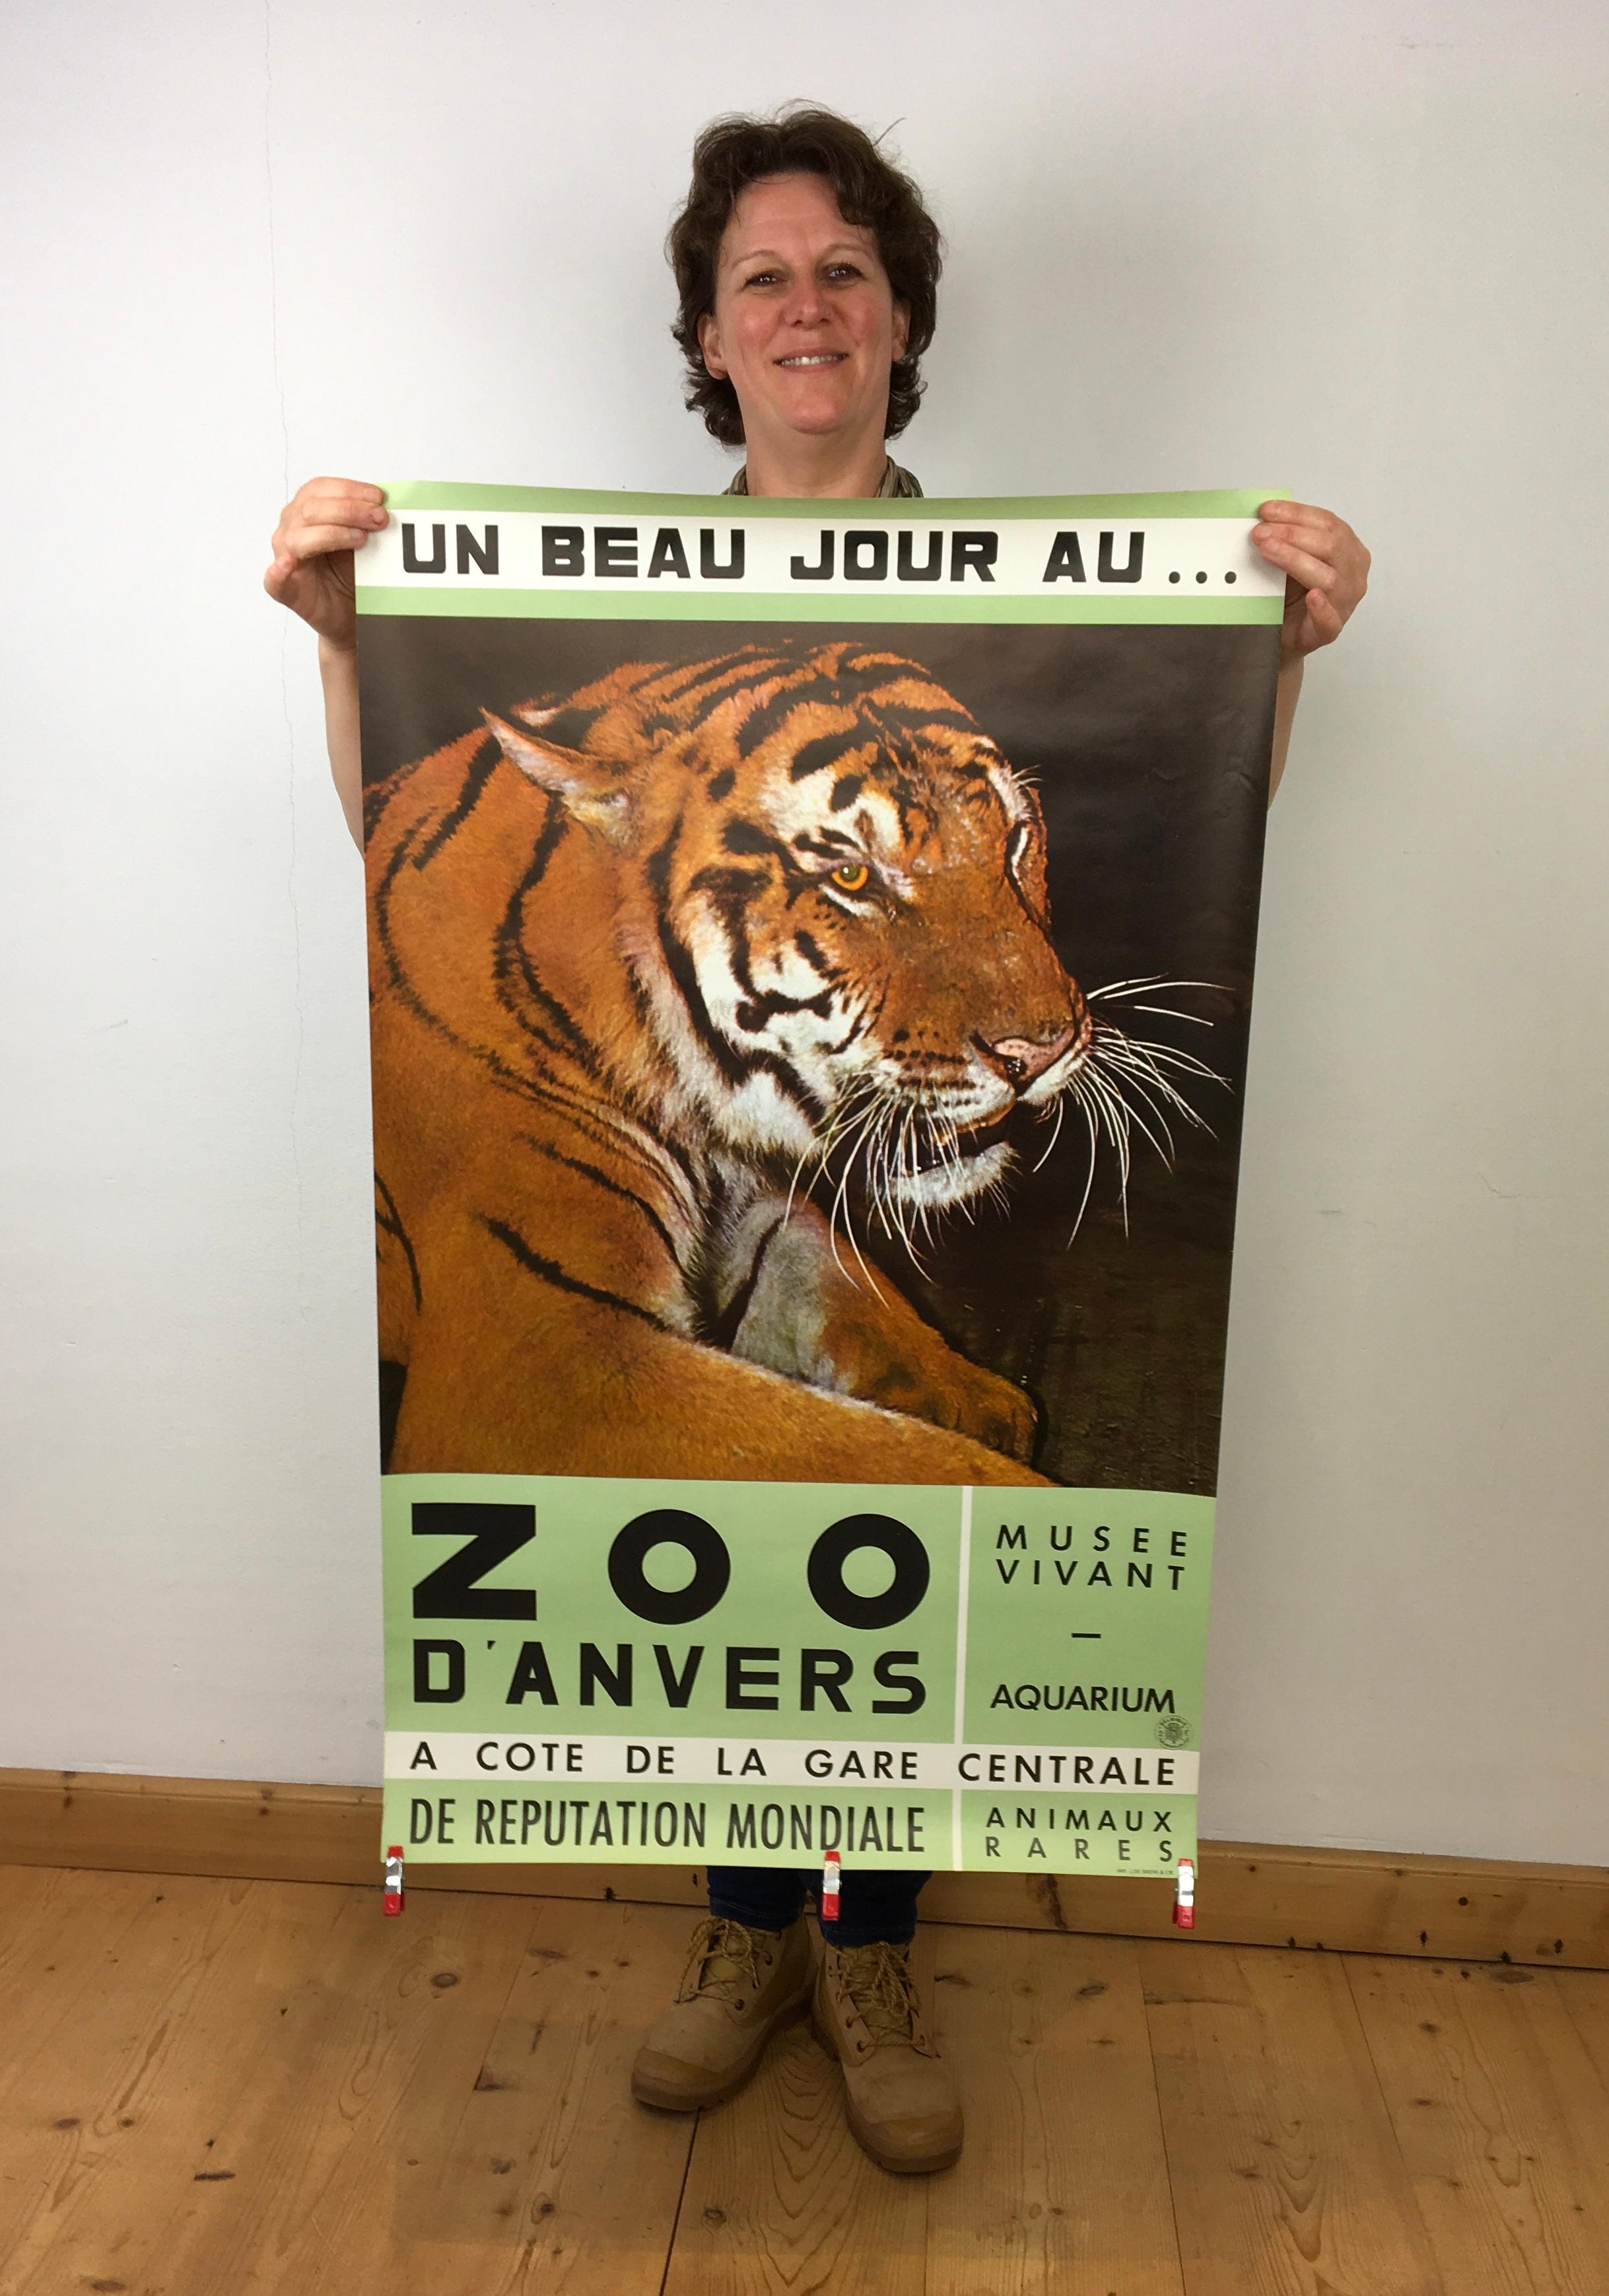 Zoo Antwerp Poster from the 1960s. 
Offset lithography with tiger animal.
Designed by Hilde Van Loock, 
photography by Victor Six 
printed by J. De Grève Brussels. 
Title: Have a nice day at the Zoo in Antwerp ! 

This vintage zoo poster - print is